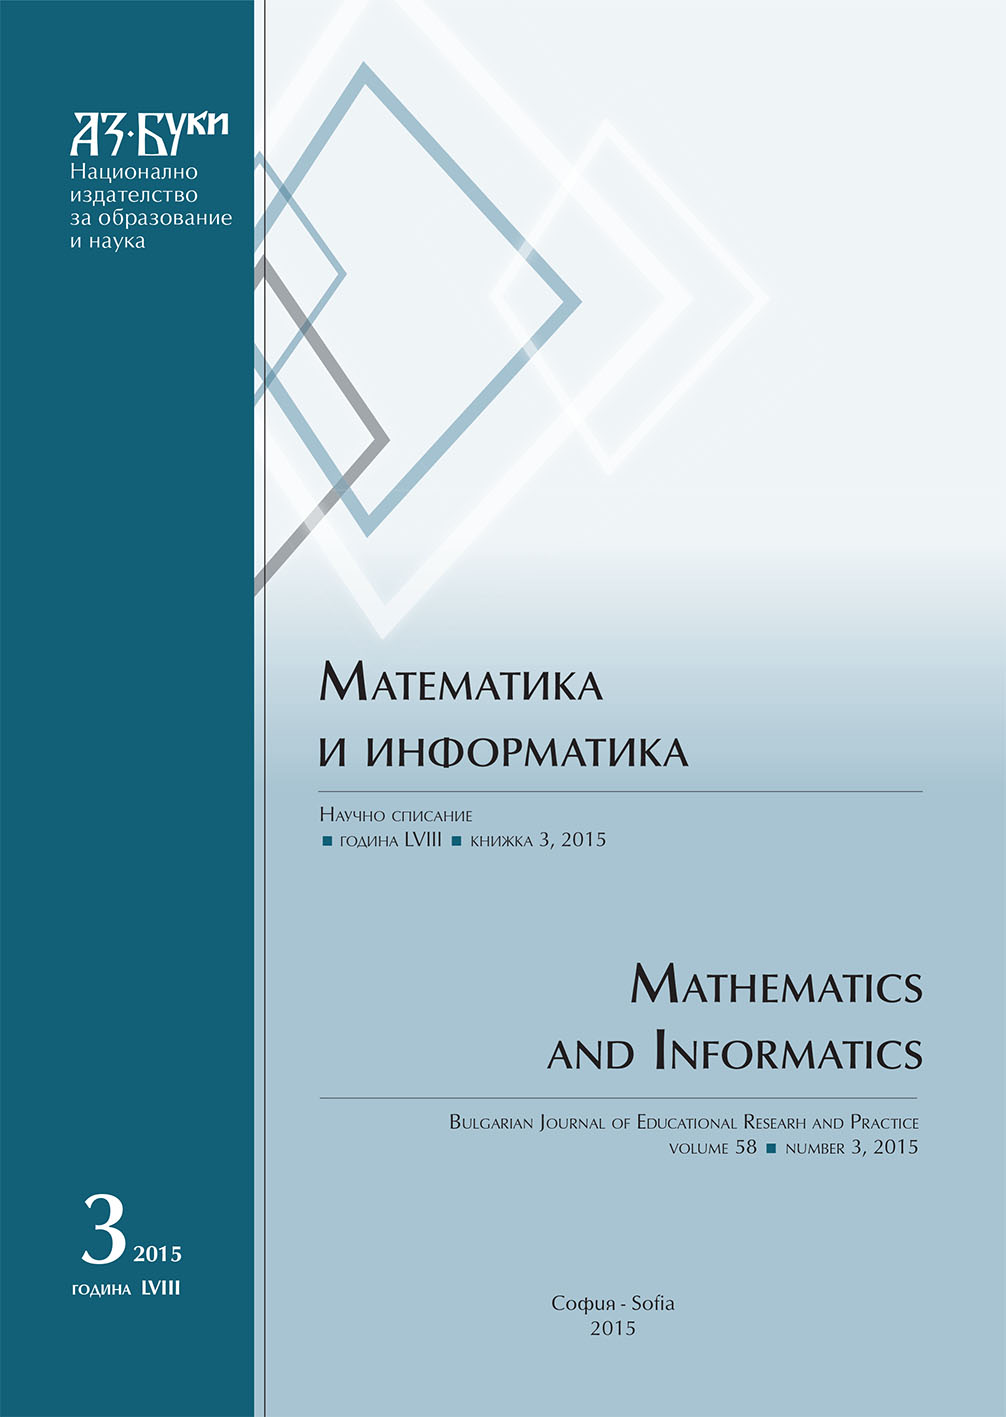 Comparative Analysis Regarding the Study of Transformations in the Euclidean Plane by Applying Complex Numbers